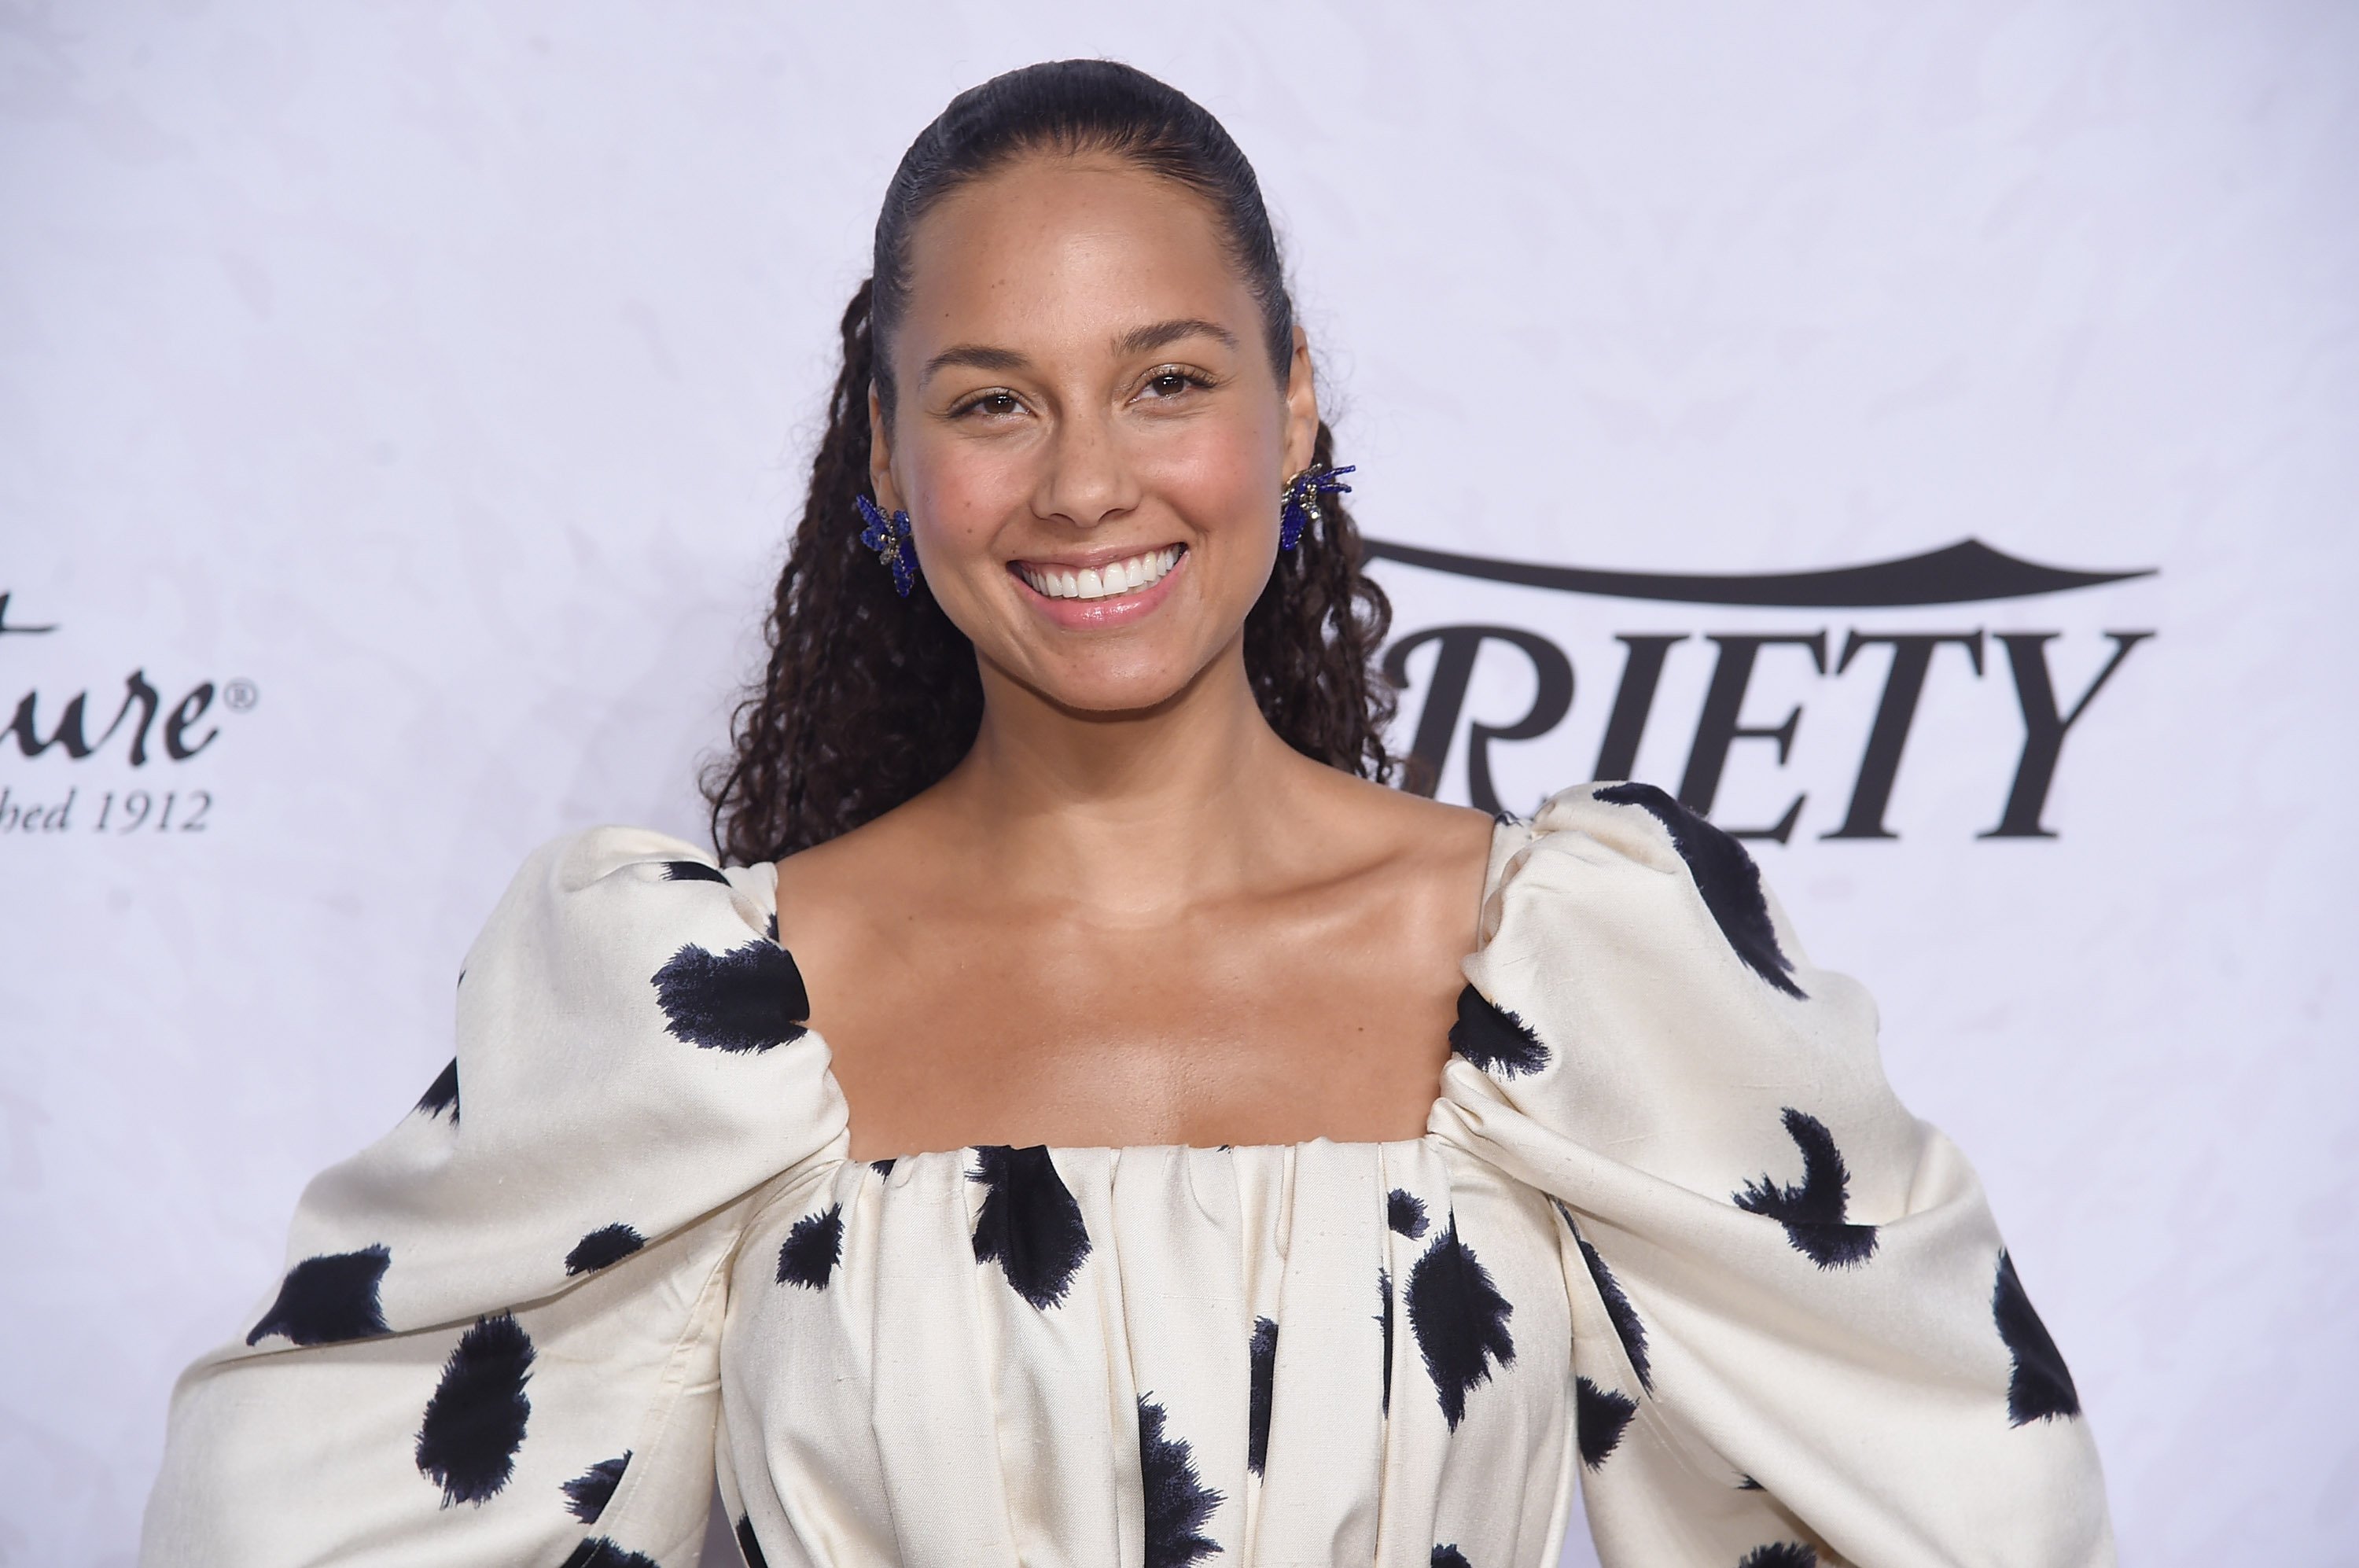 Alicia Keys at Variety's "Power of Women: New York" at Cipriani Wall Street on April 13, 2018. | Photo: Getty Images